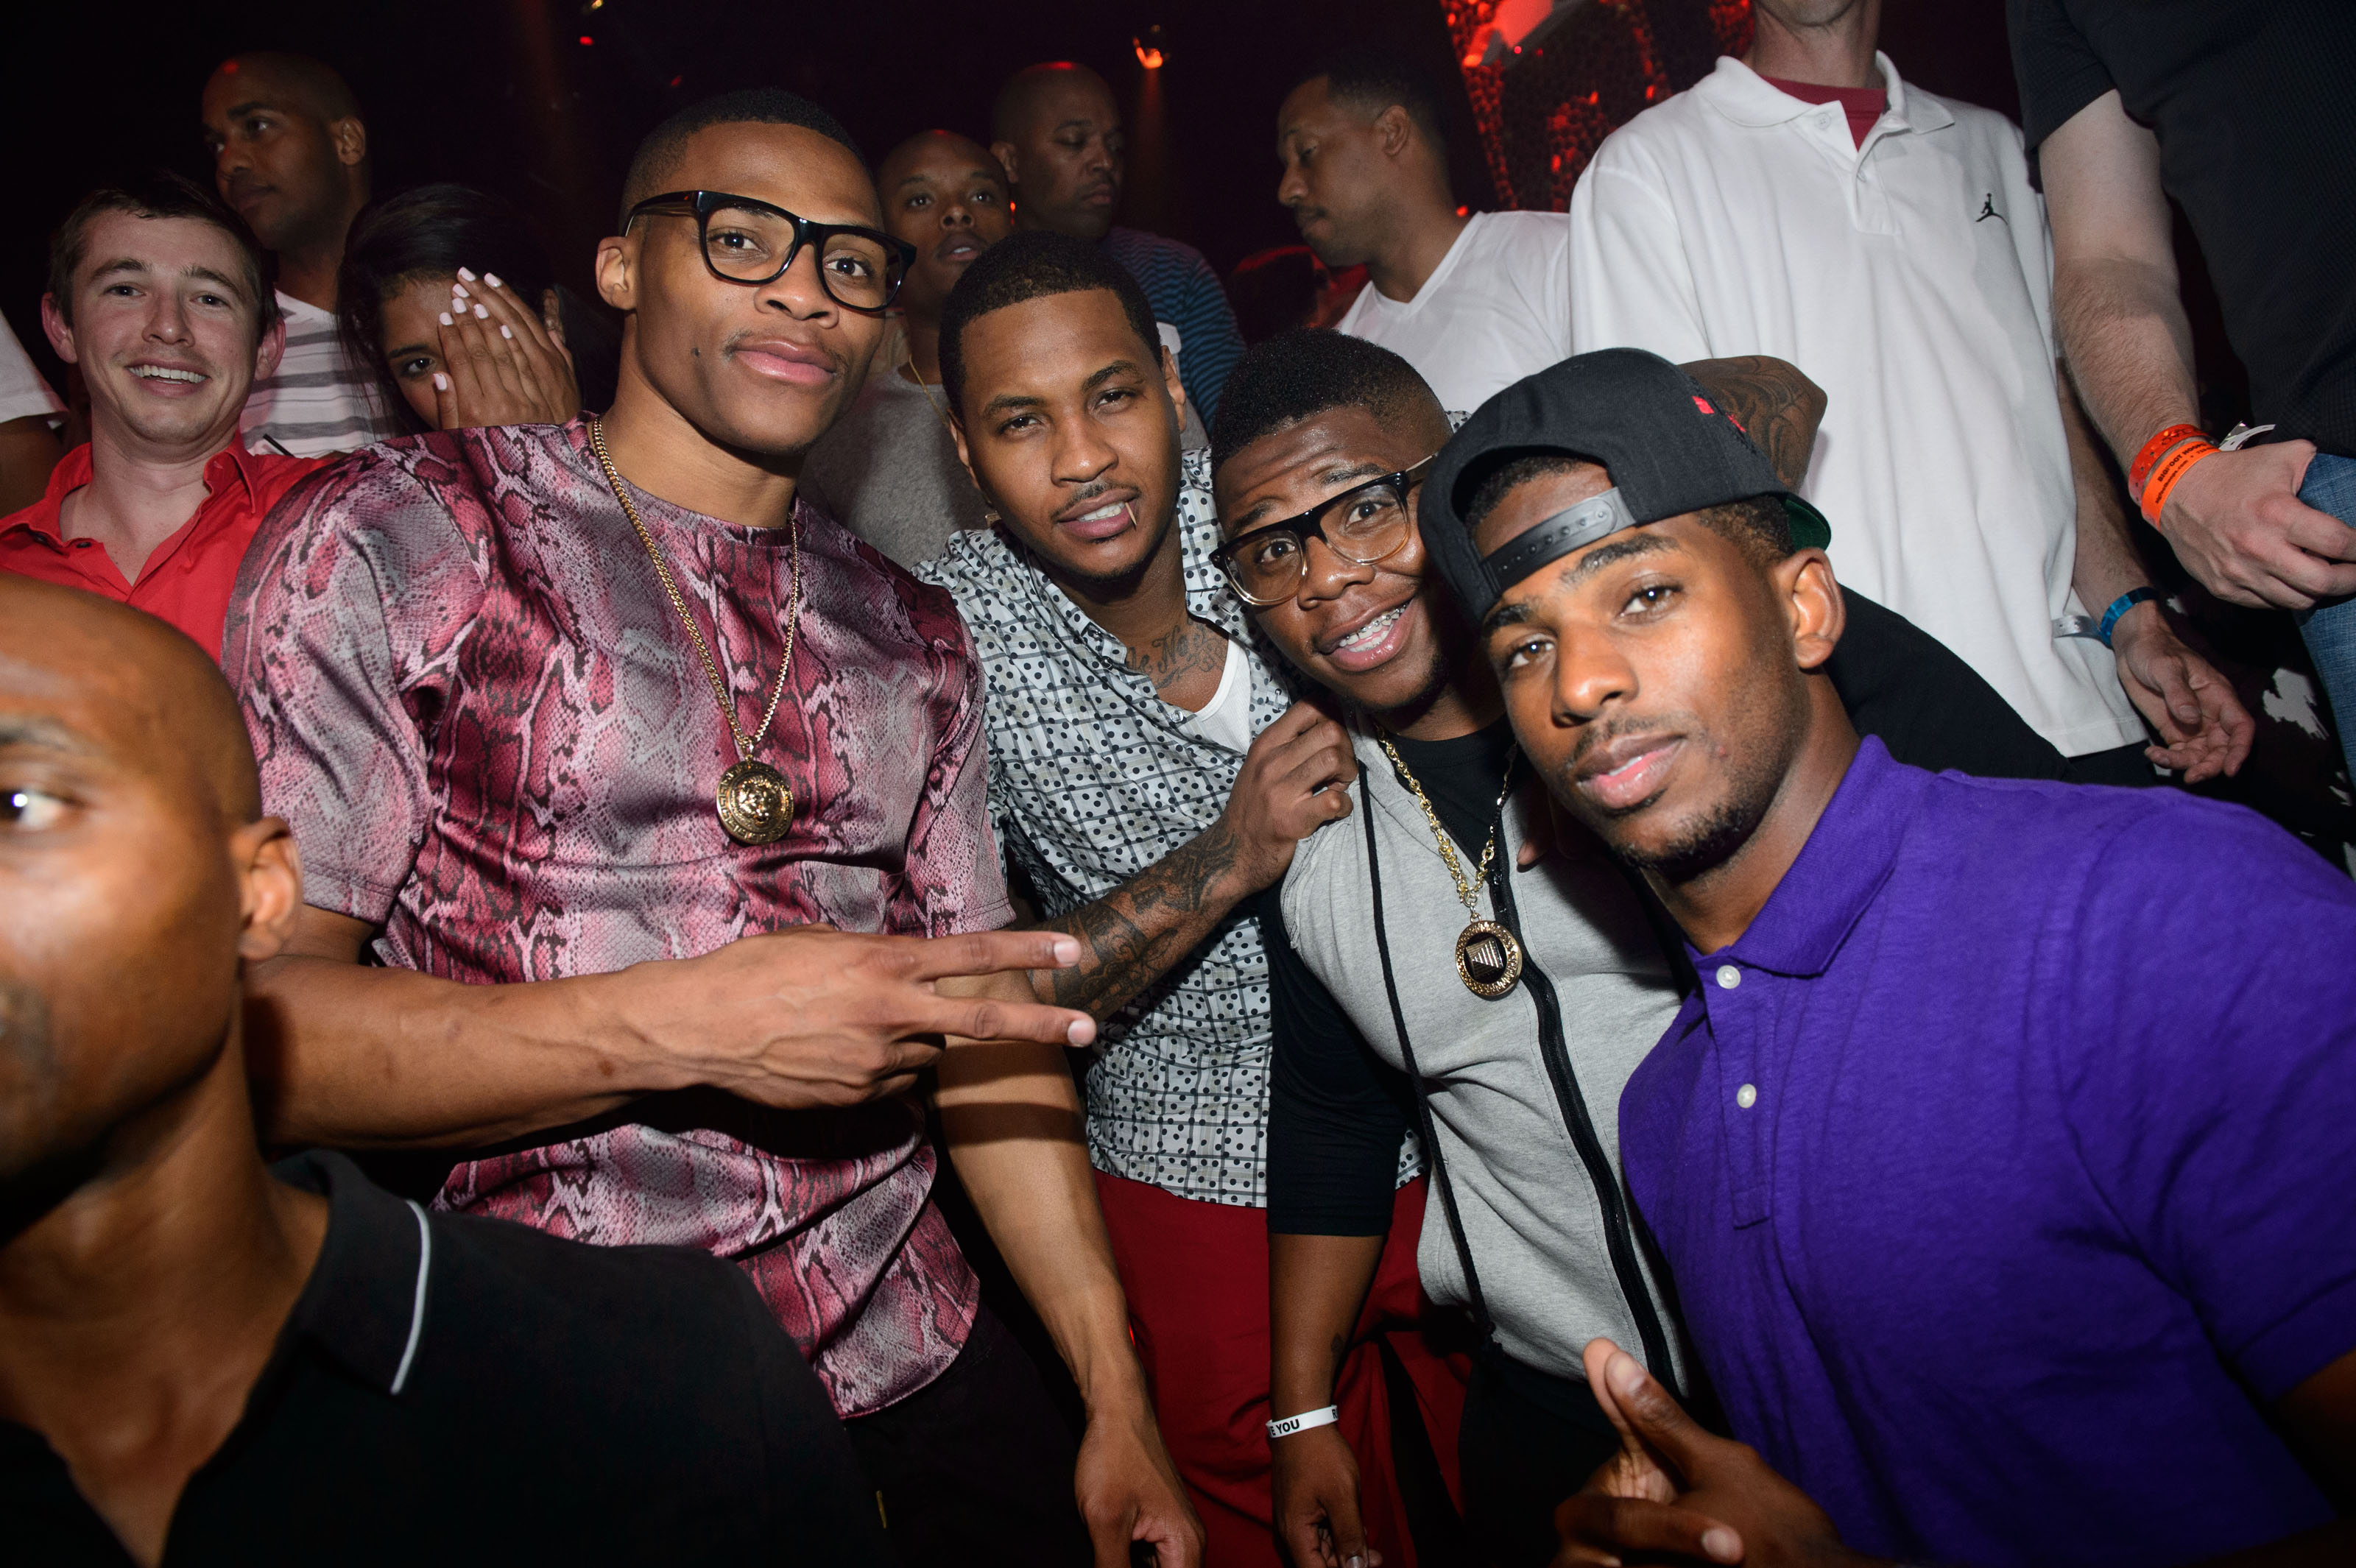 Russell Westbrook, Carmelo Anthony, & Chris Paul at TAO - photo by Al Powers/PowersImagery